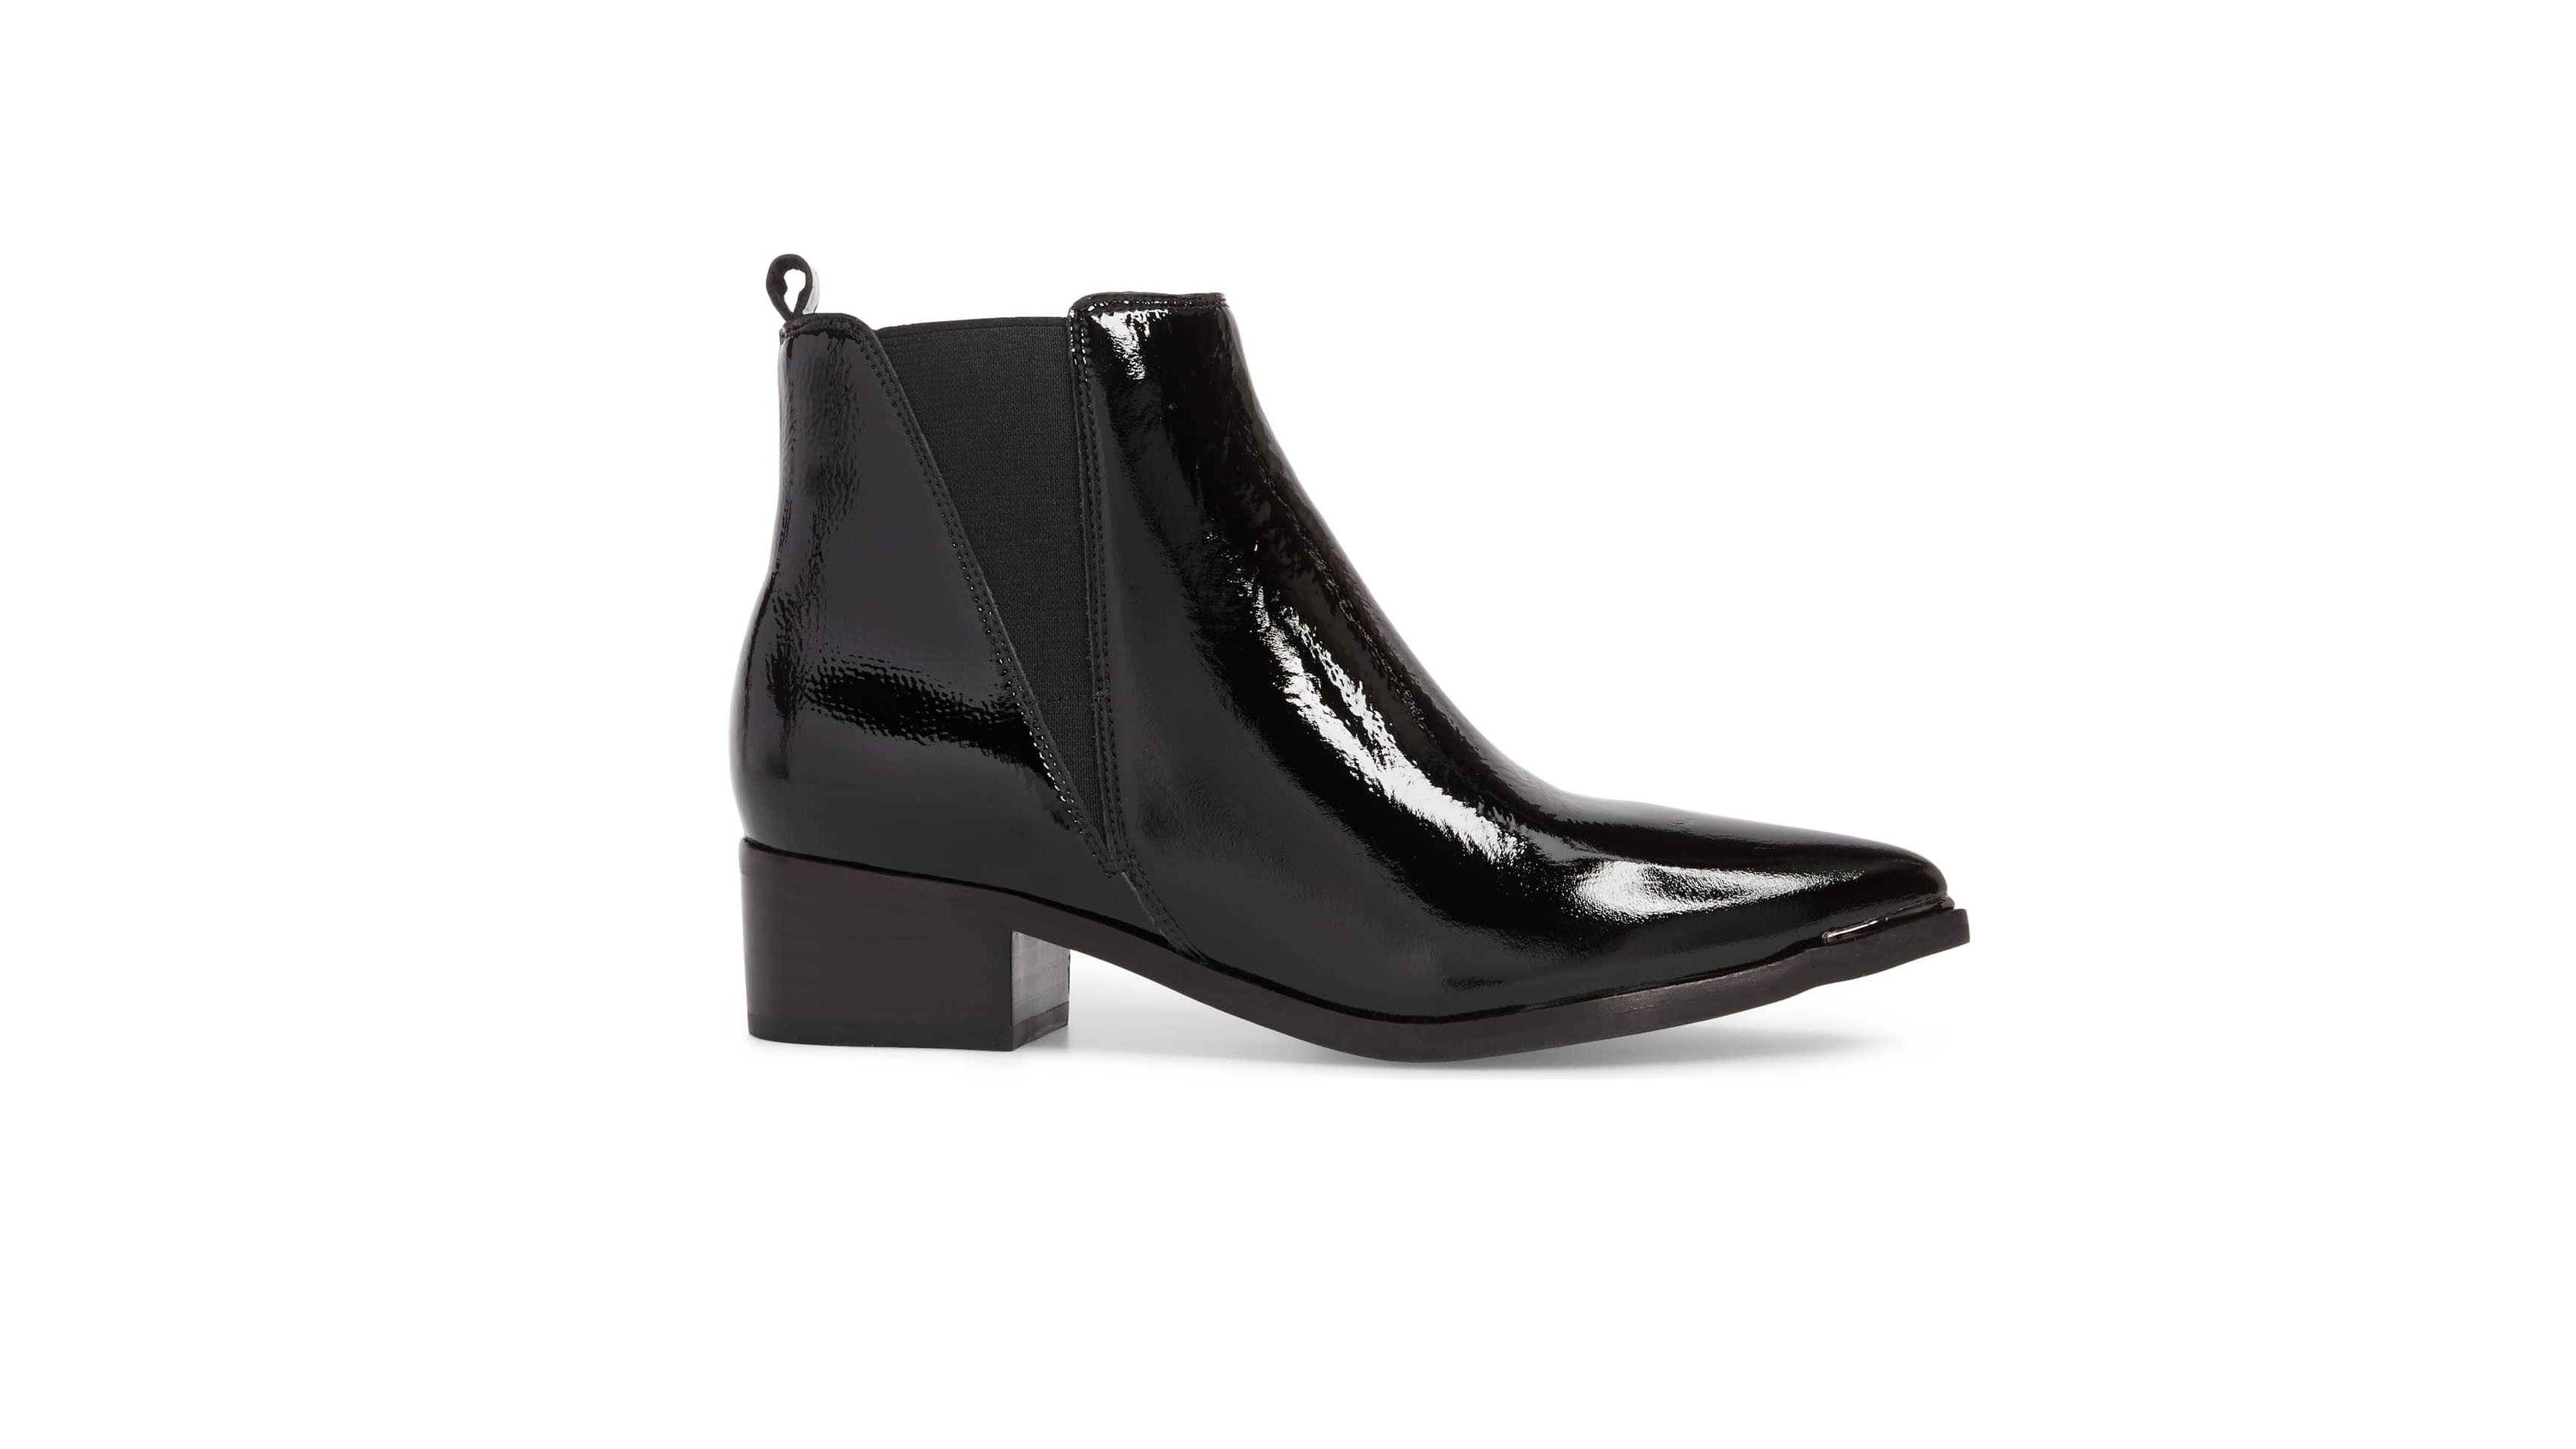 Shop These Ankle Boots in a Variety of Colors and Textures